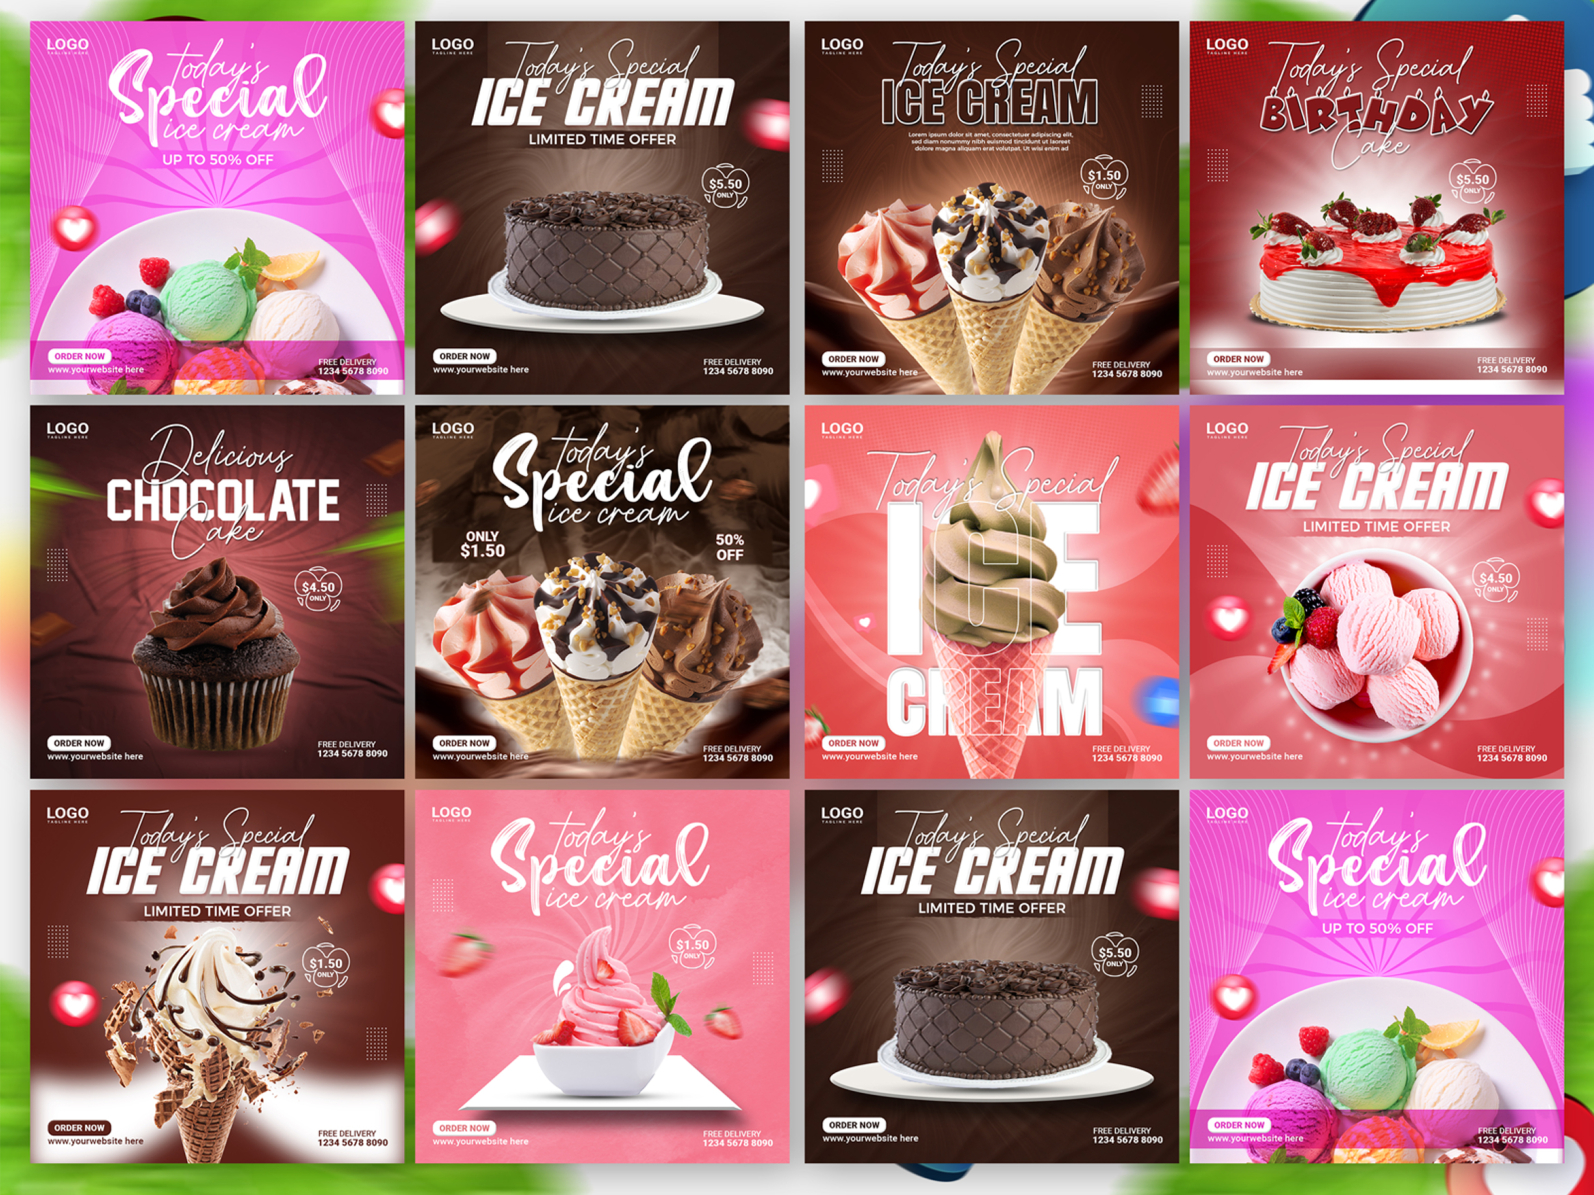 Special delicious ice cream social media banner post design by Abu